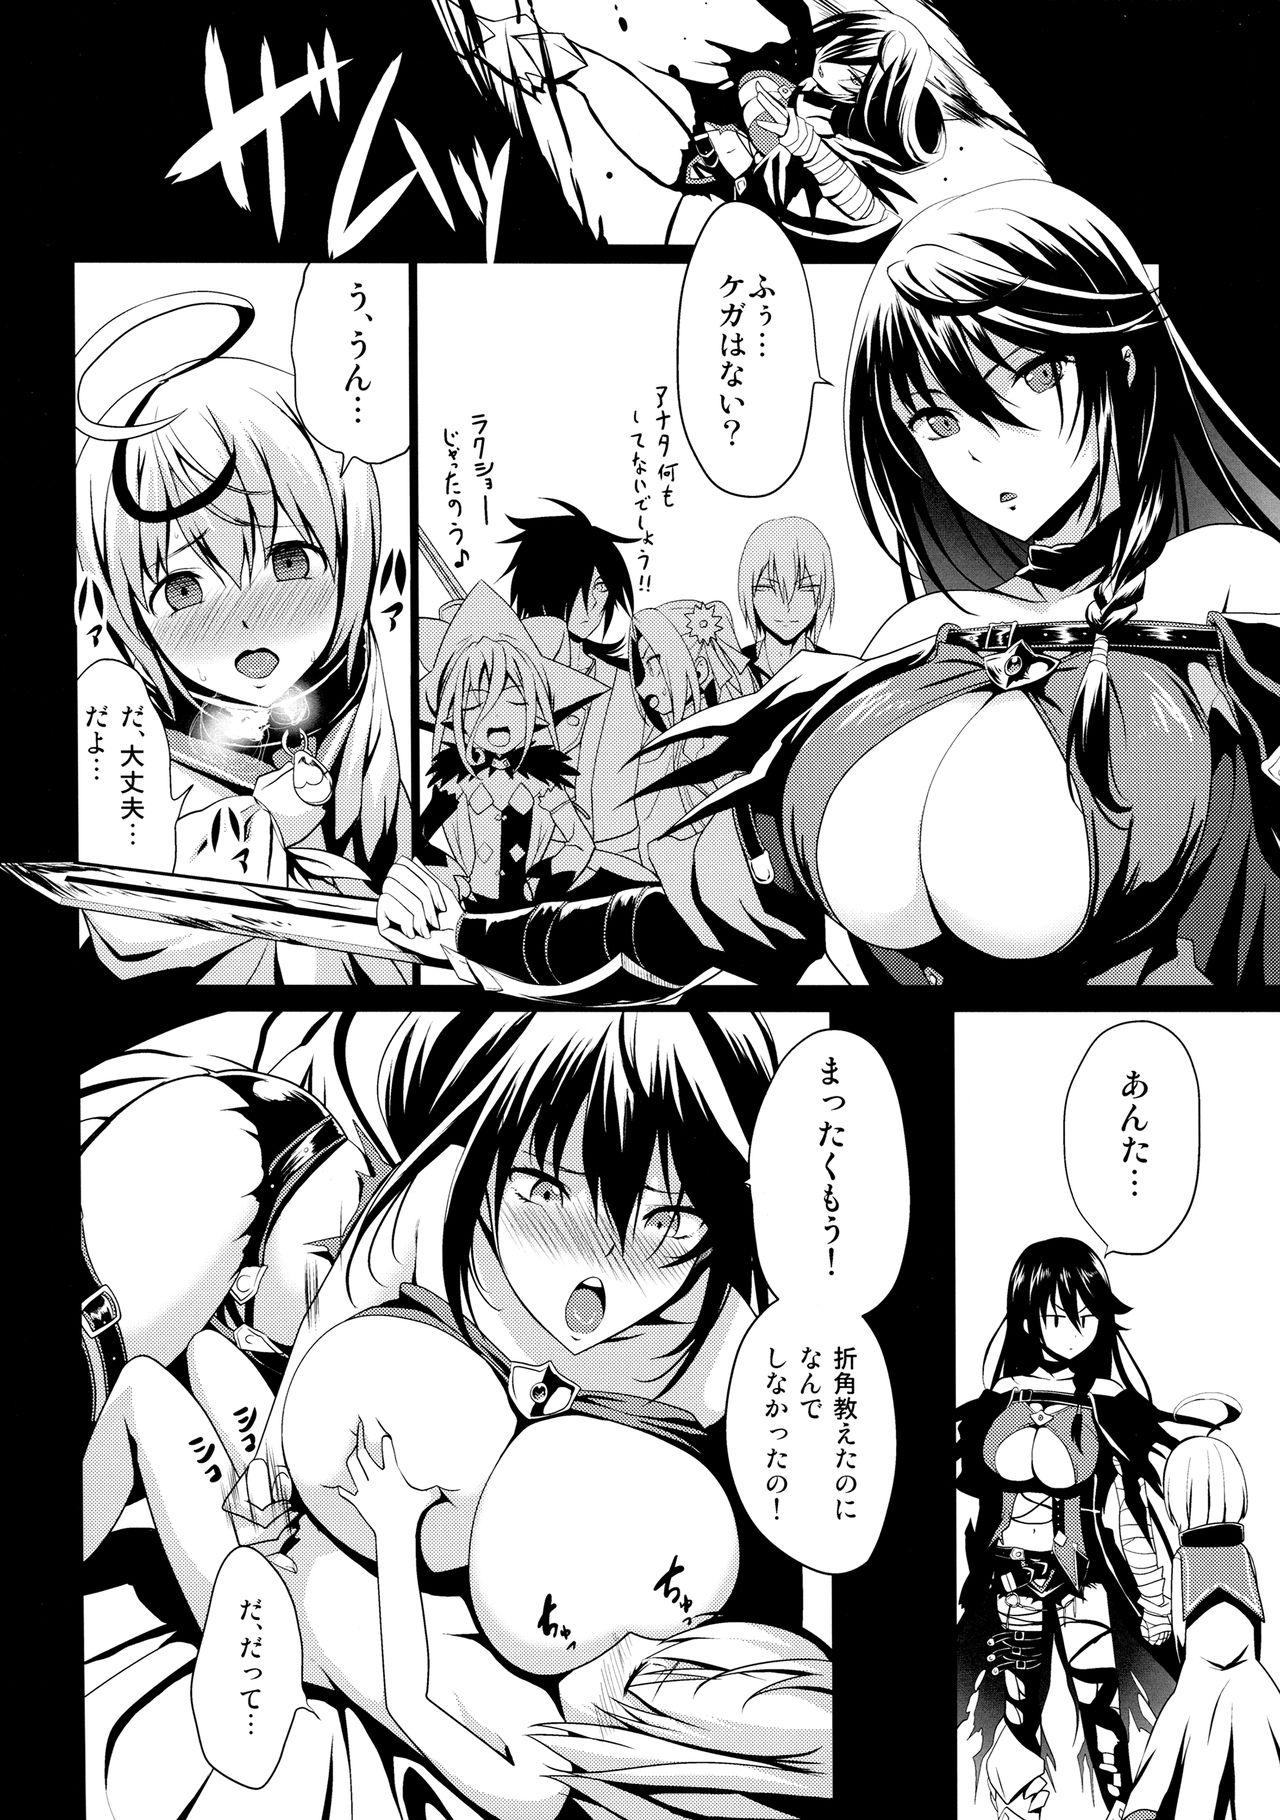 Street Tales of Breastia - Tales of berseria Officesex - Page 7